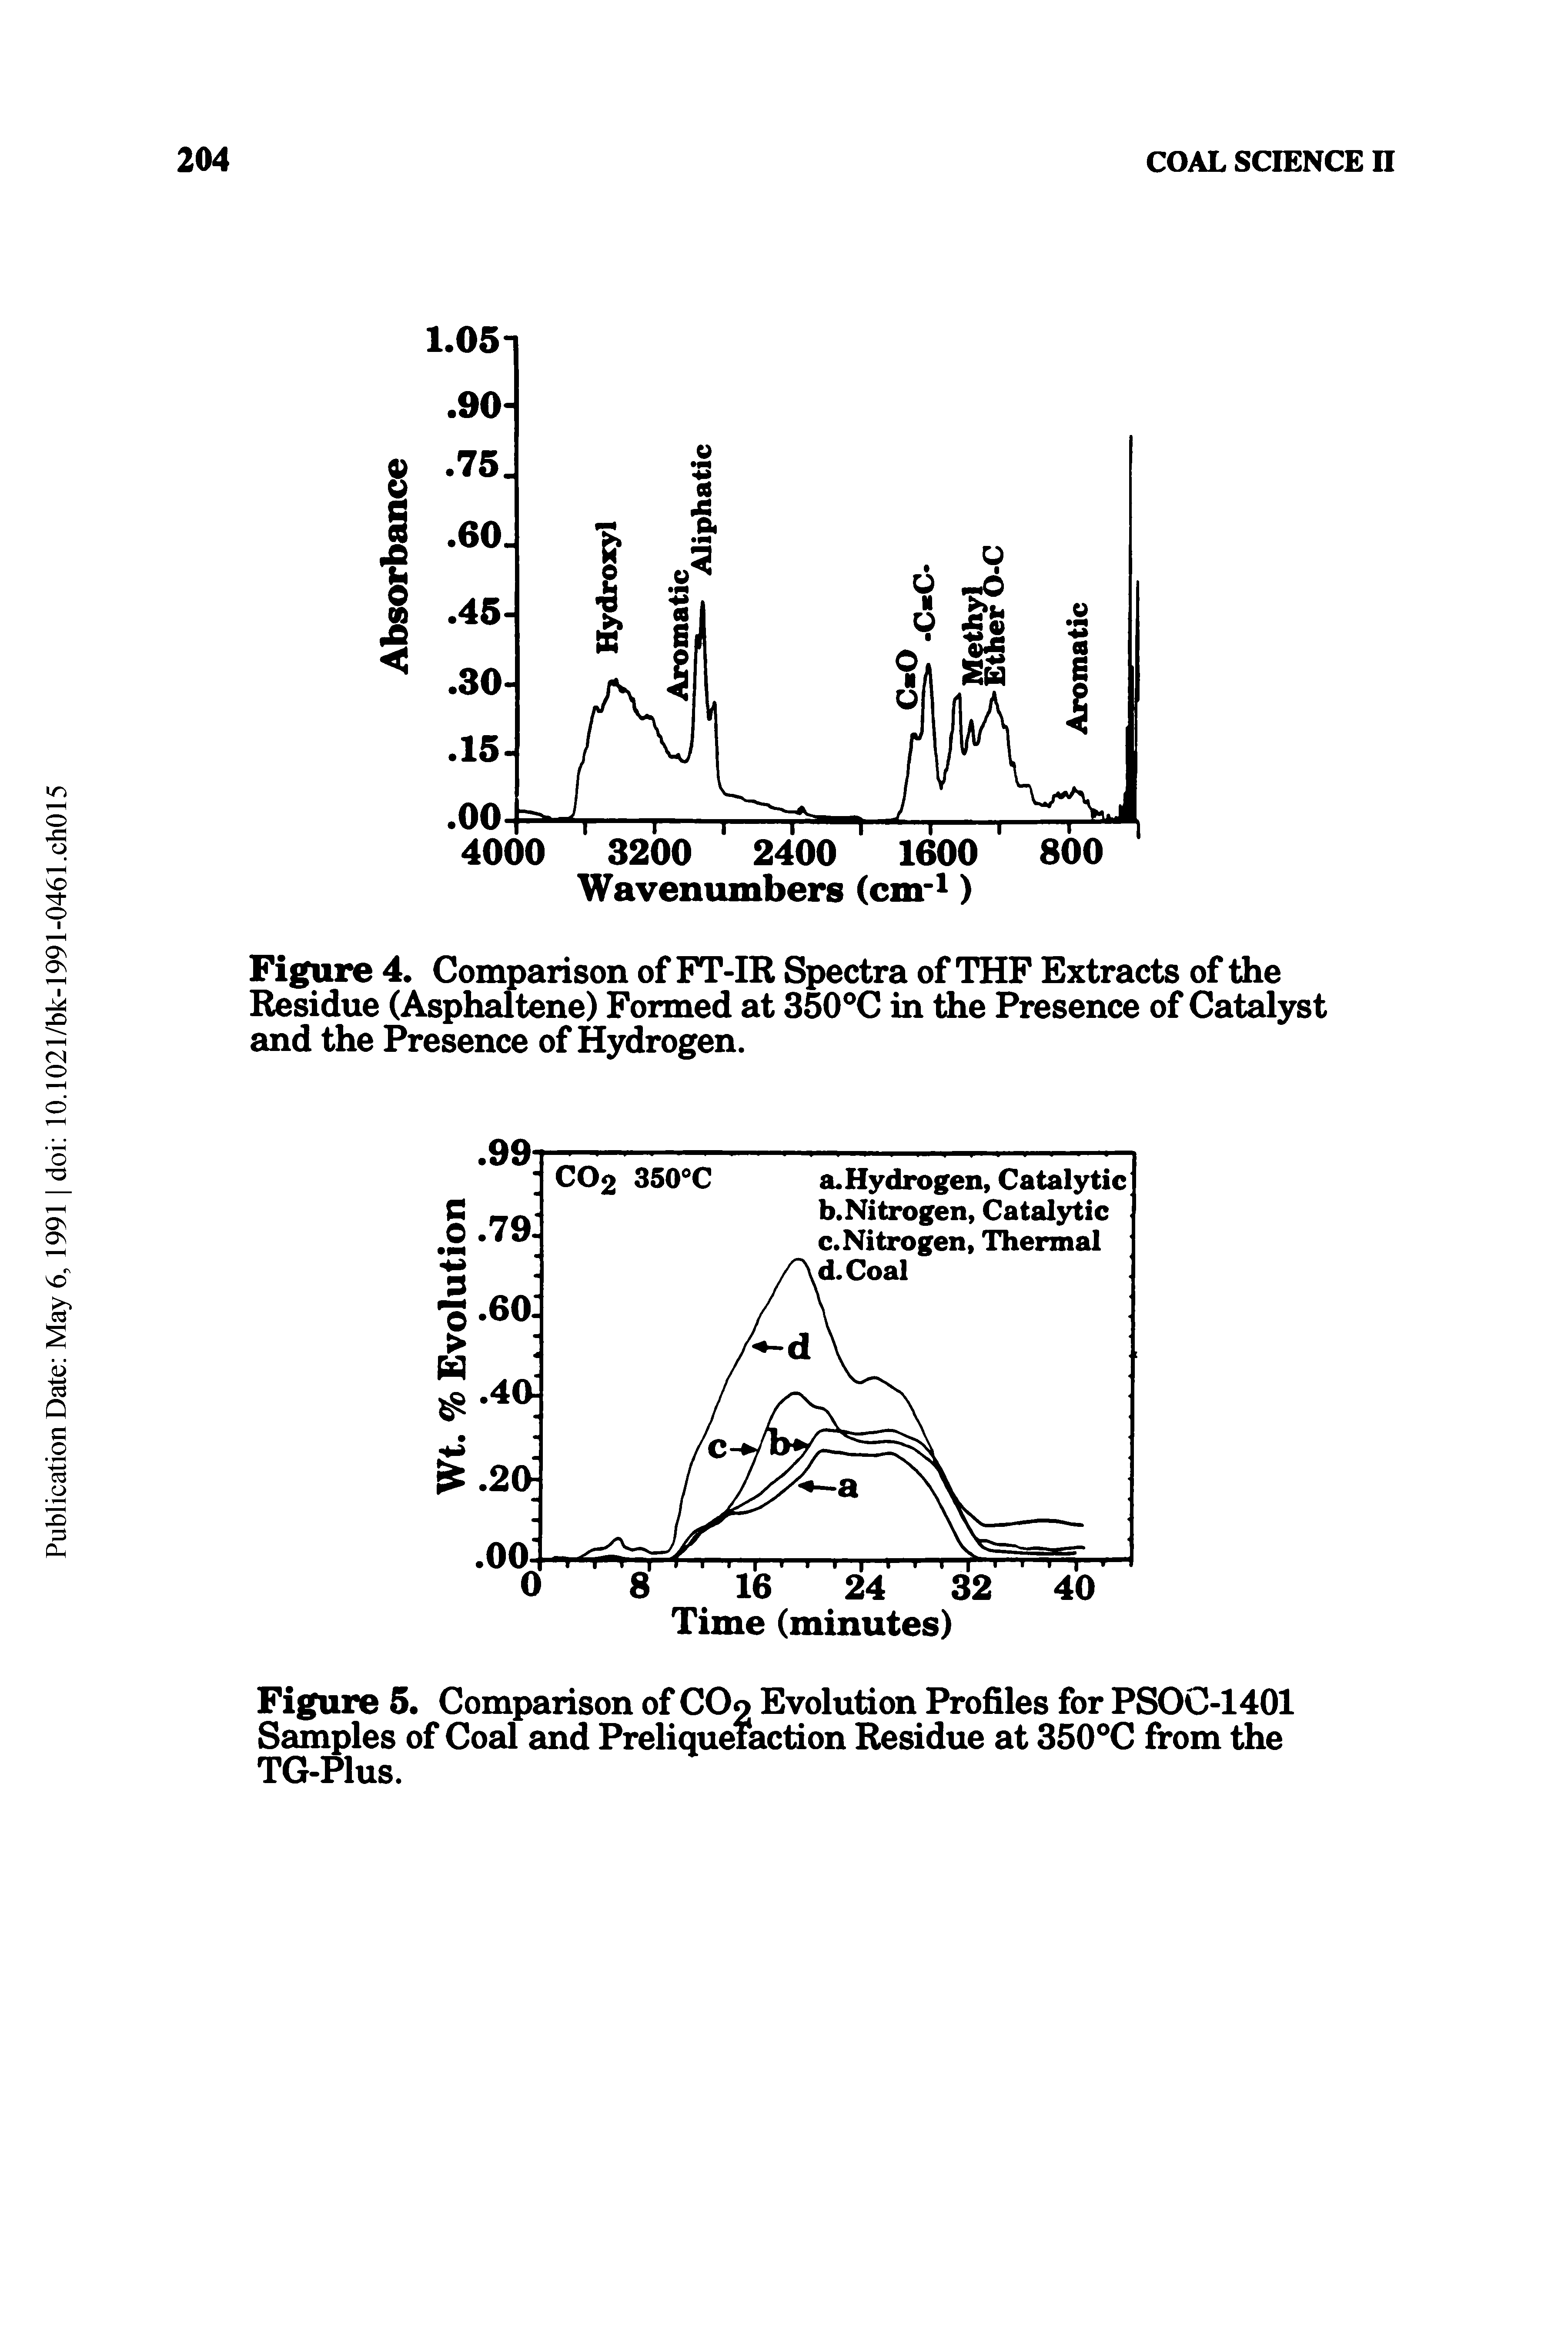 Figure 4. Comparison of FT-IR Spectra of THF Extracts of the Residue (Asphaltene) Formed at 350 C in the Presence of Catalyst and the Presence of Hydrogen.